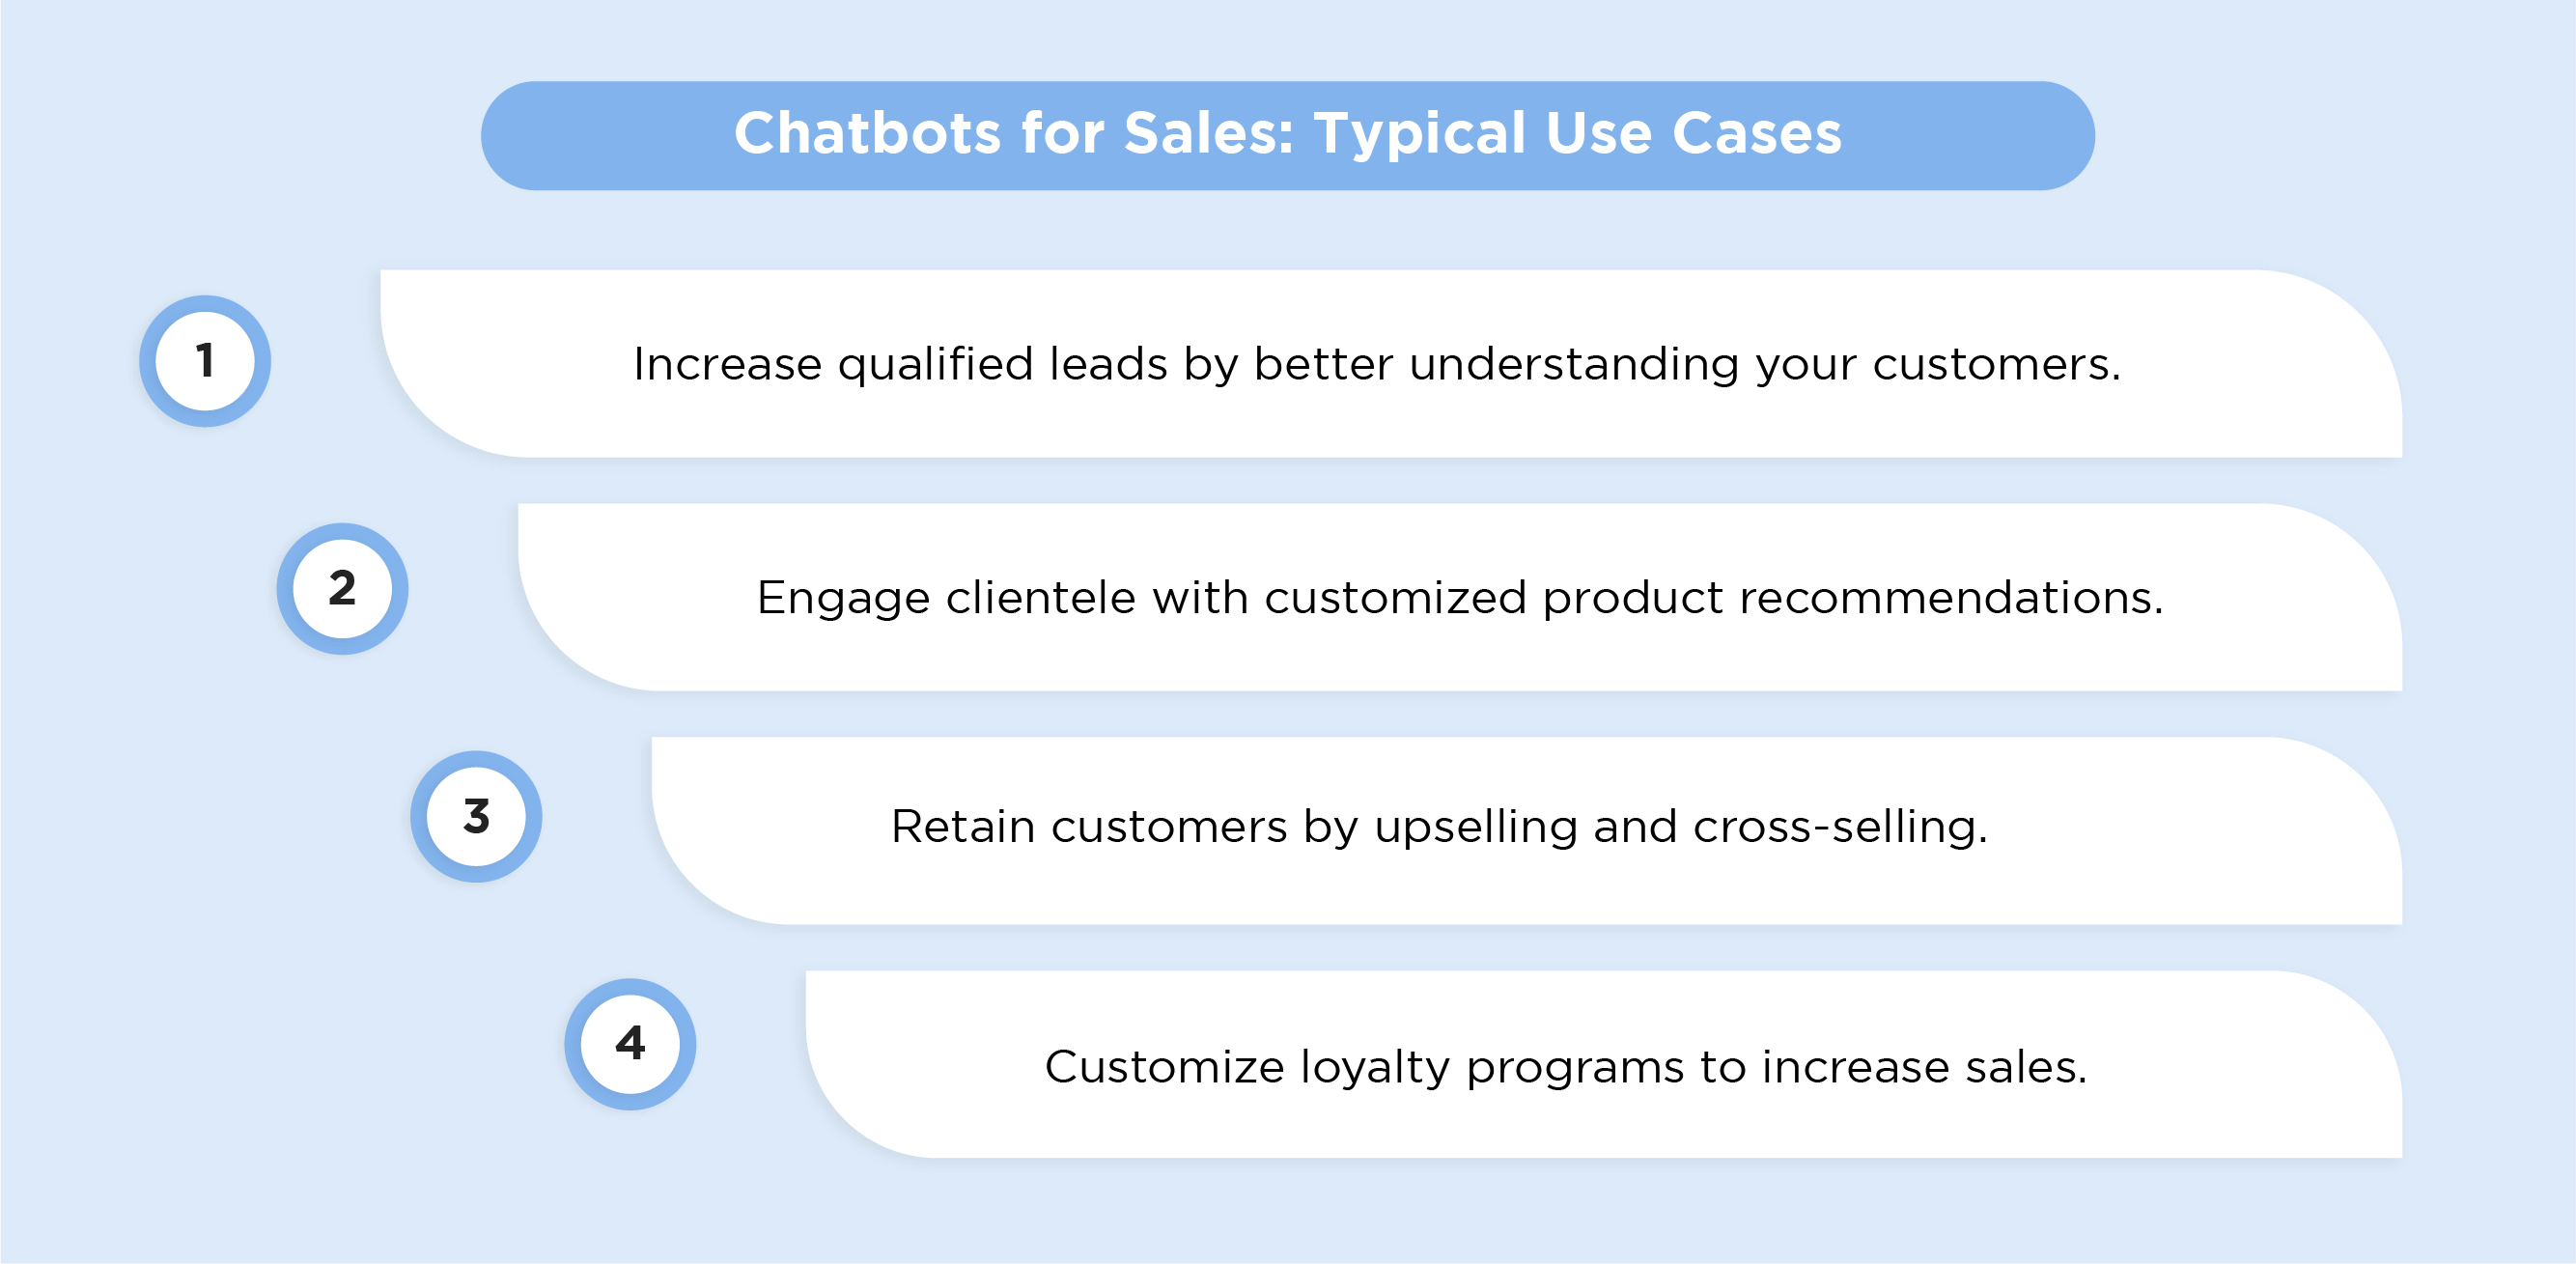 Chatbots for Sales: Typical Use Cases